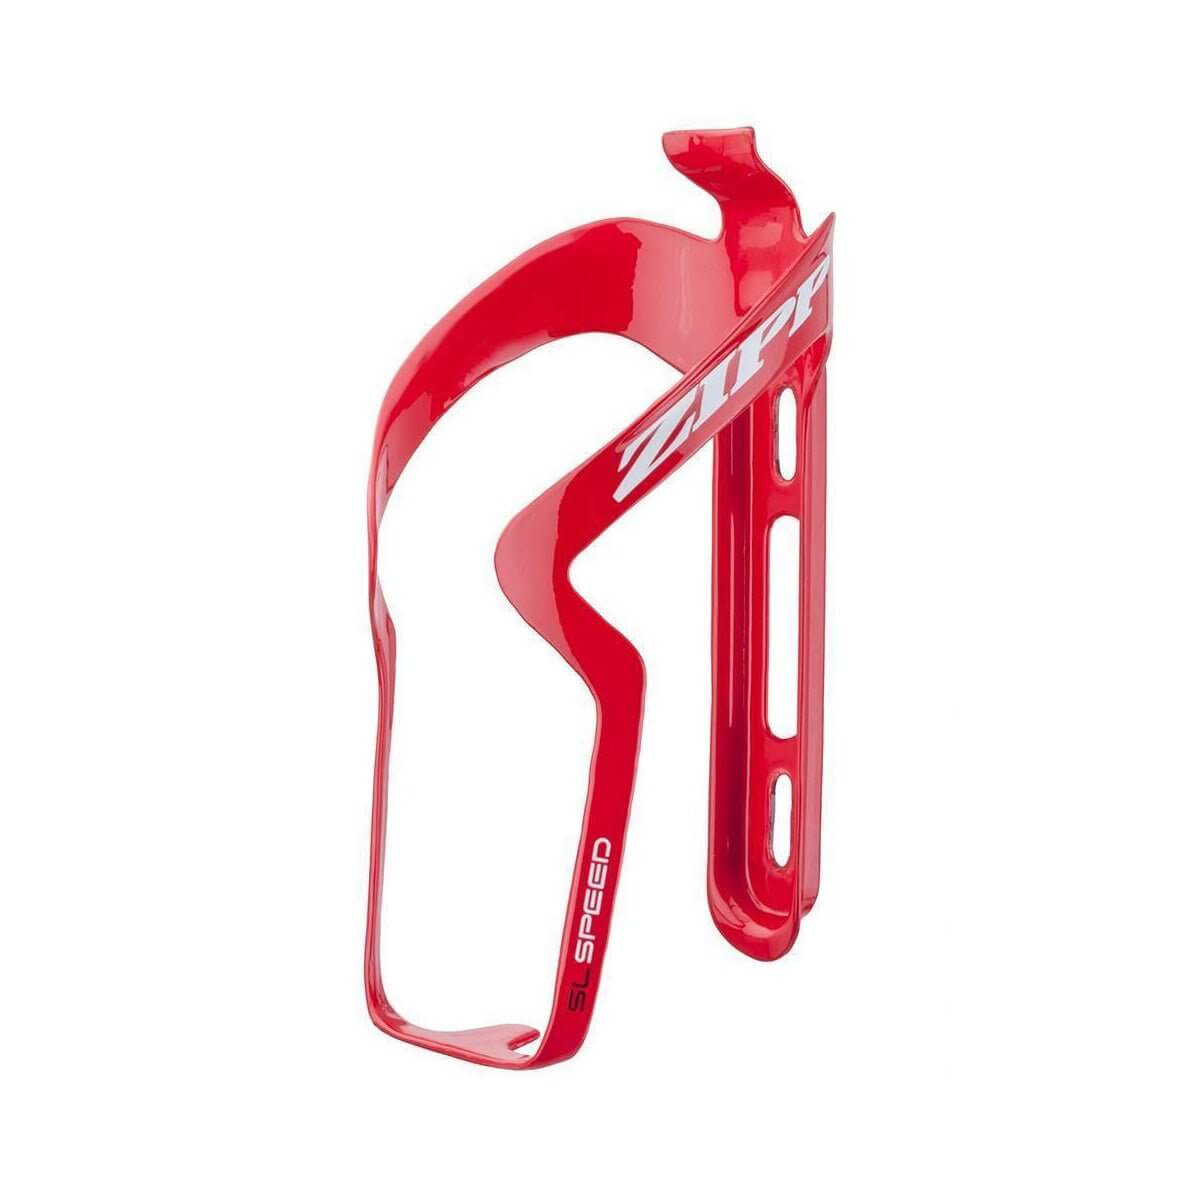 Zipp SL Speed Carbon Bottle Cage | Strictly Bicycles